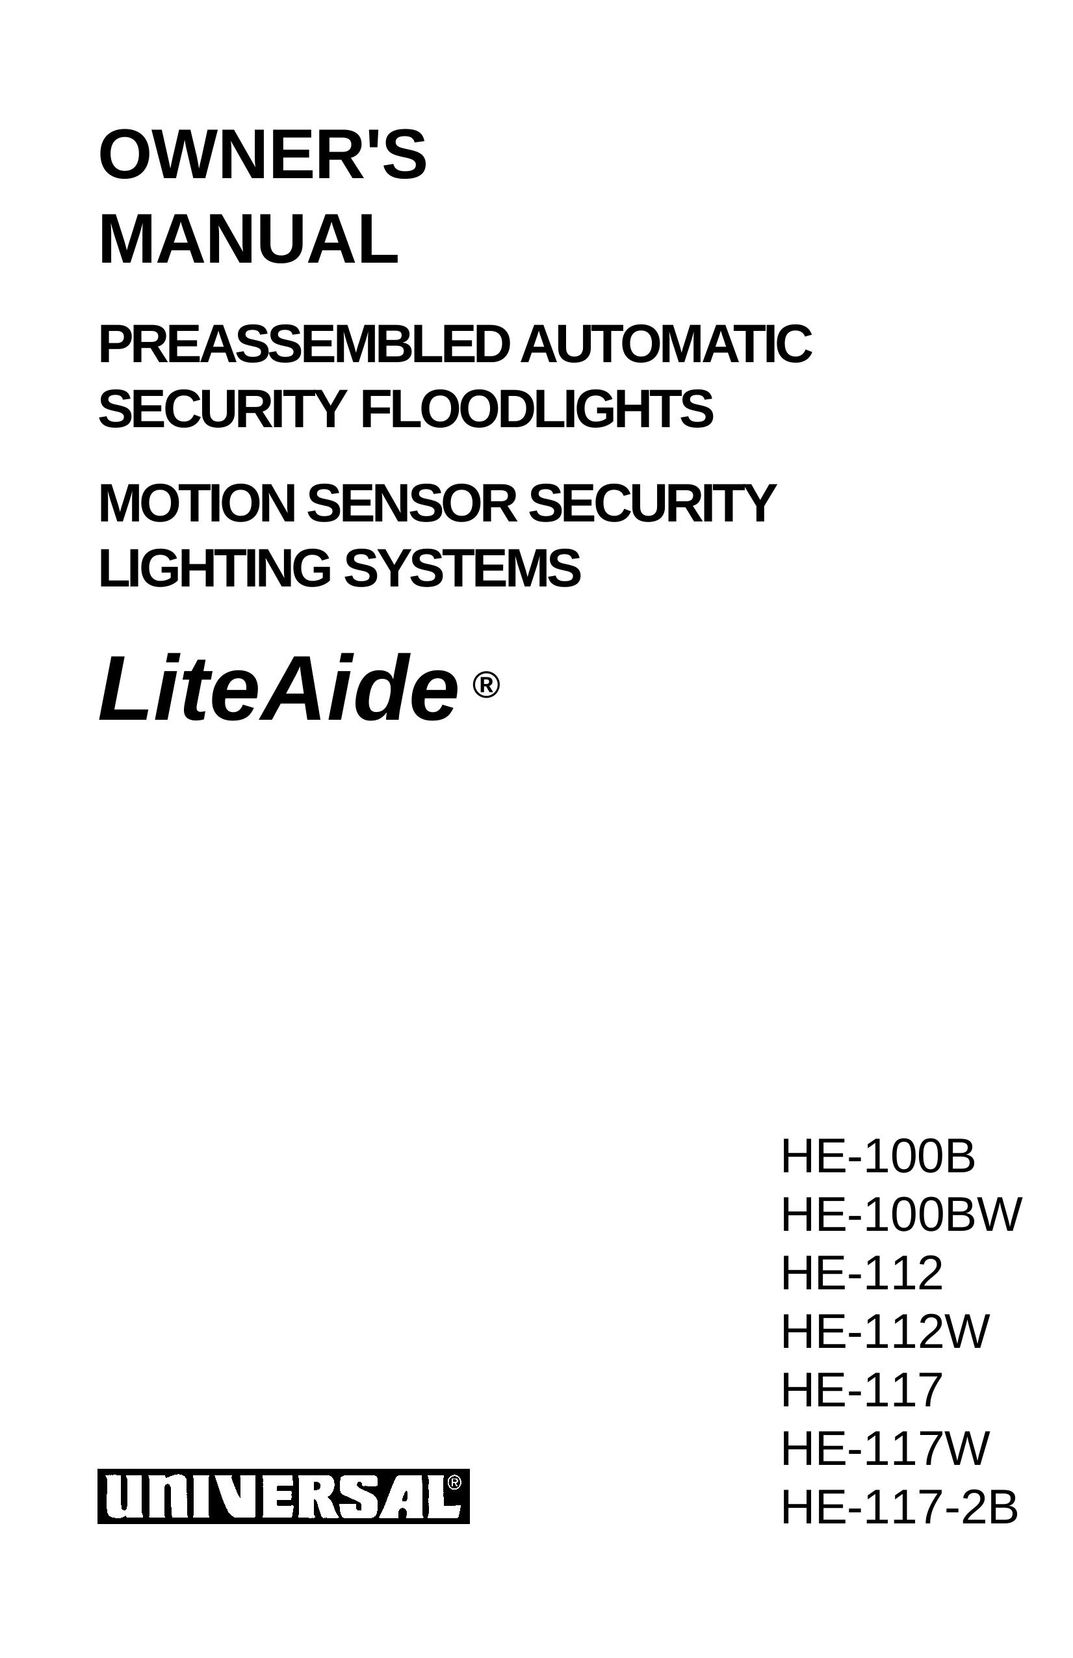 Universal HE-112 Home Security System User Manual